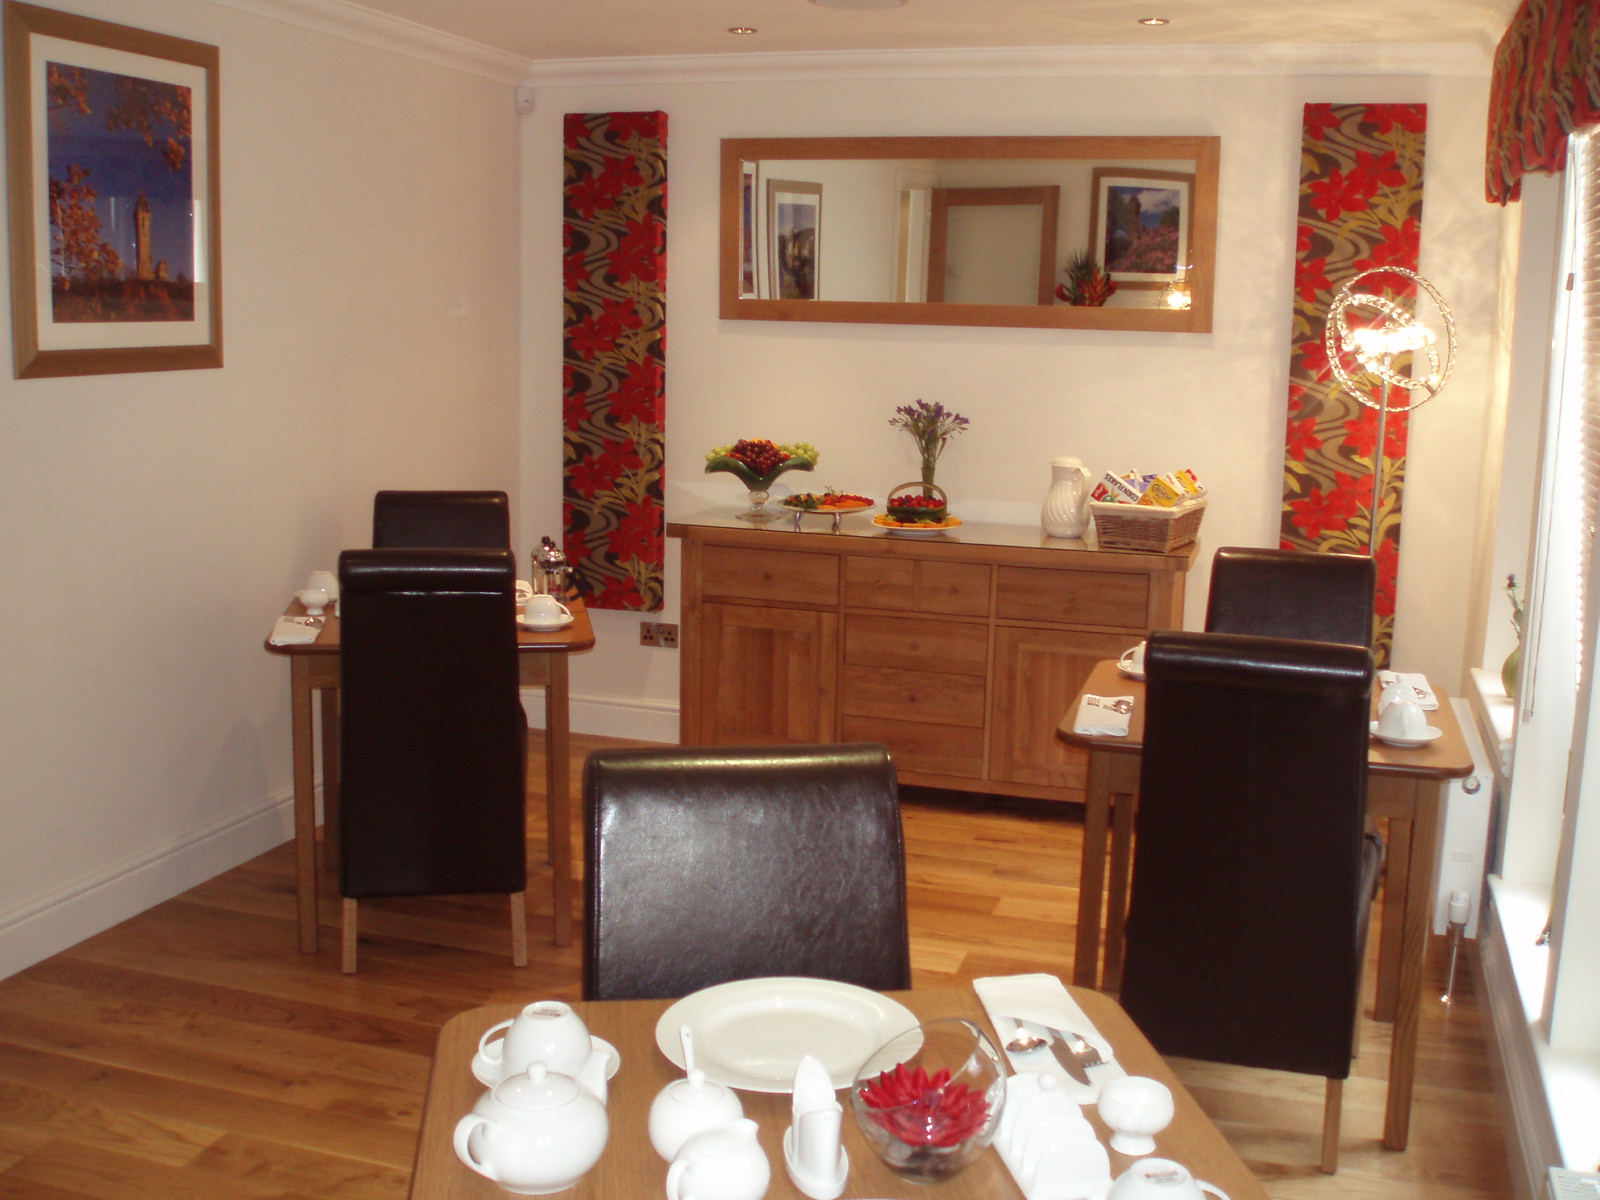 AbbeyCraig Bed and Breakfast - Dining Area.